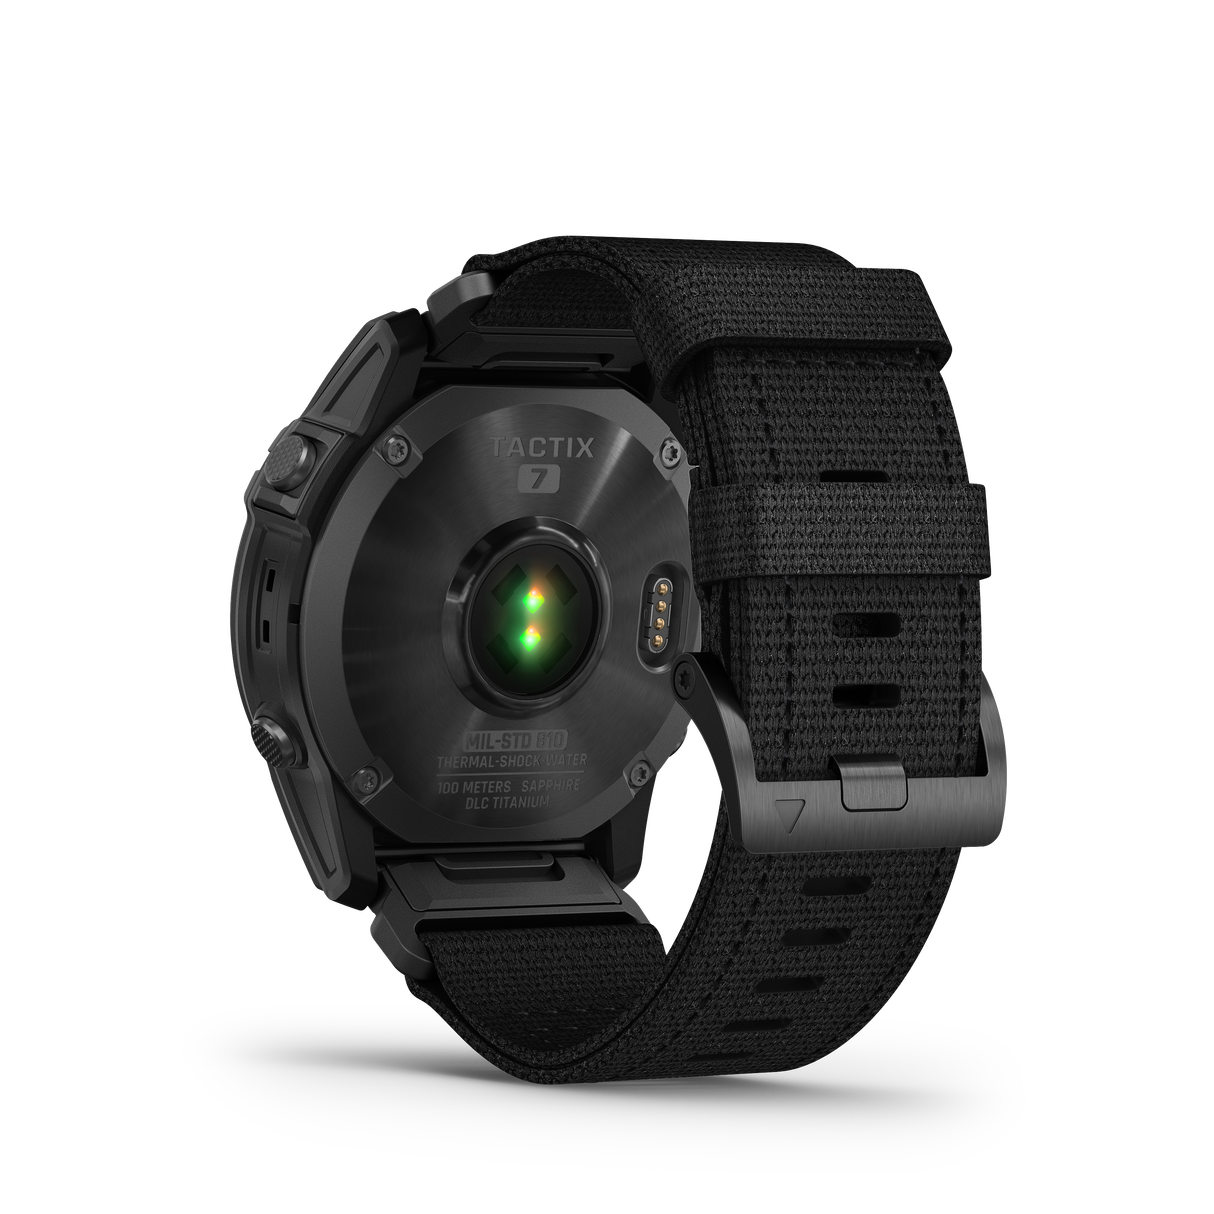 Tactix® 7 – Pro Edition - The Tactix® 7 Pro Edition, a rugged and advanced smartwatch built for outdoor adventures and professional use, offering a wide range of features for navigation and performance tracking.